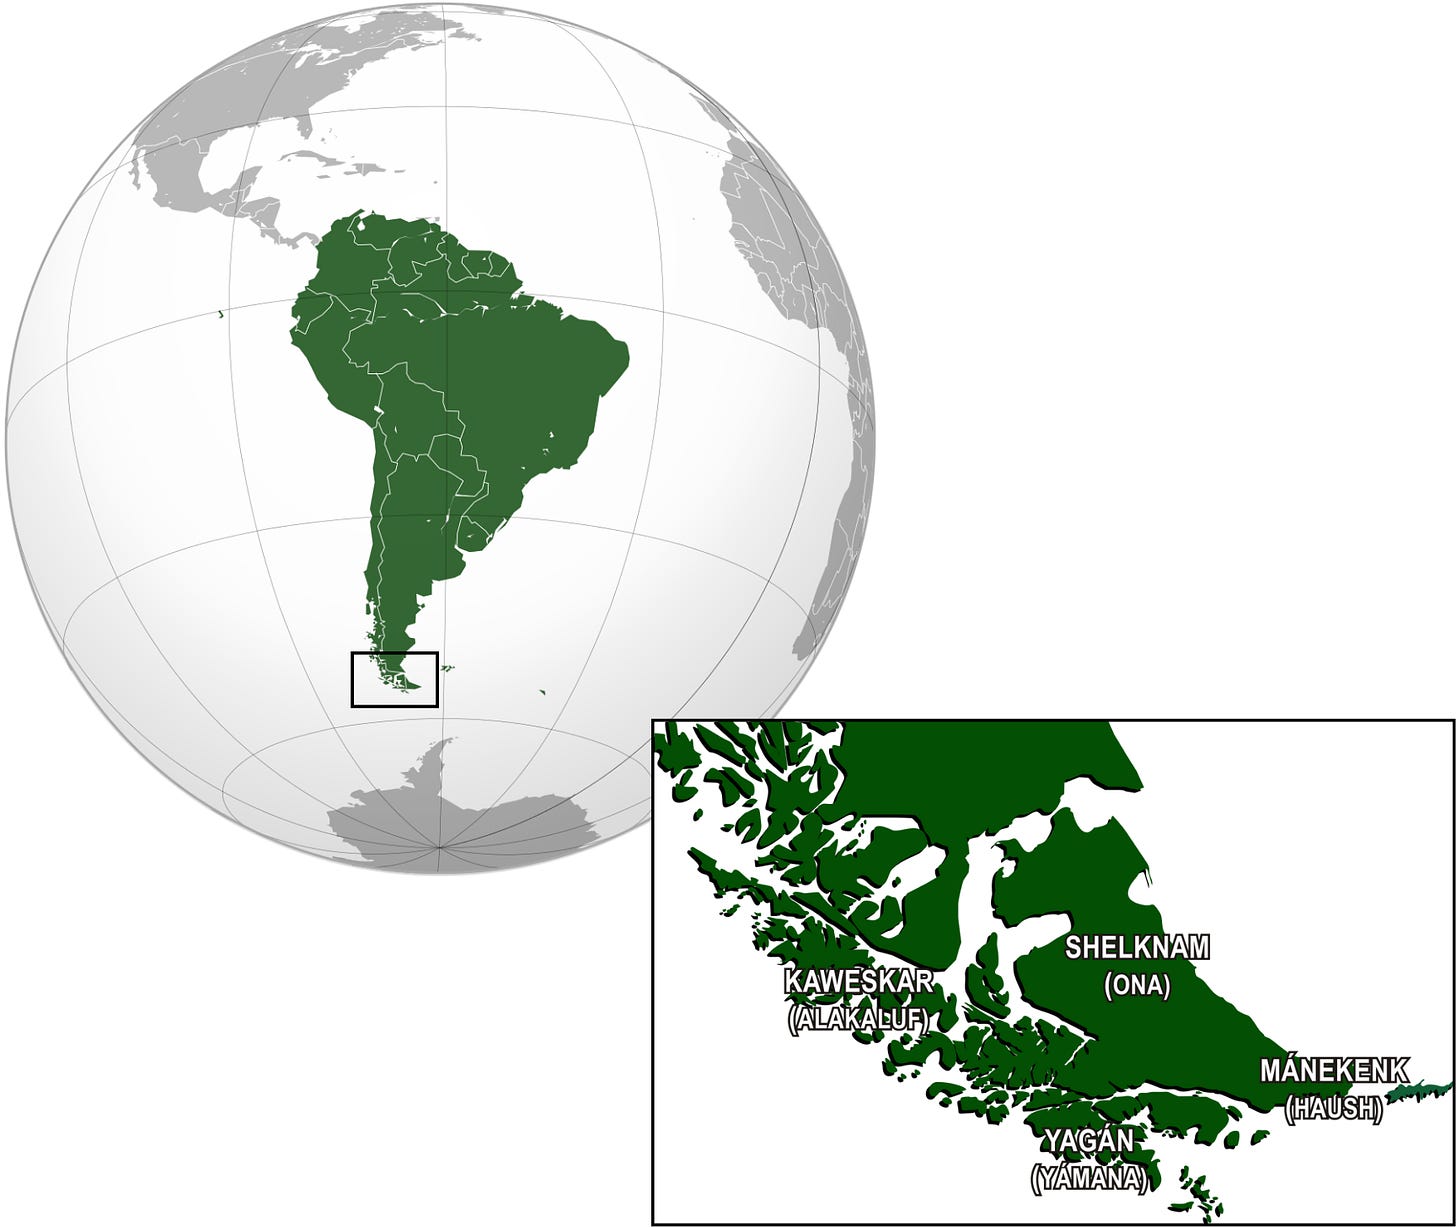 Maps showing the location of Tierra del Fuego in South America and the distribution of indigenous people groups in Tierra del Fuego (subset)